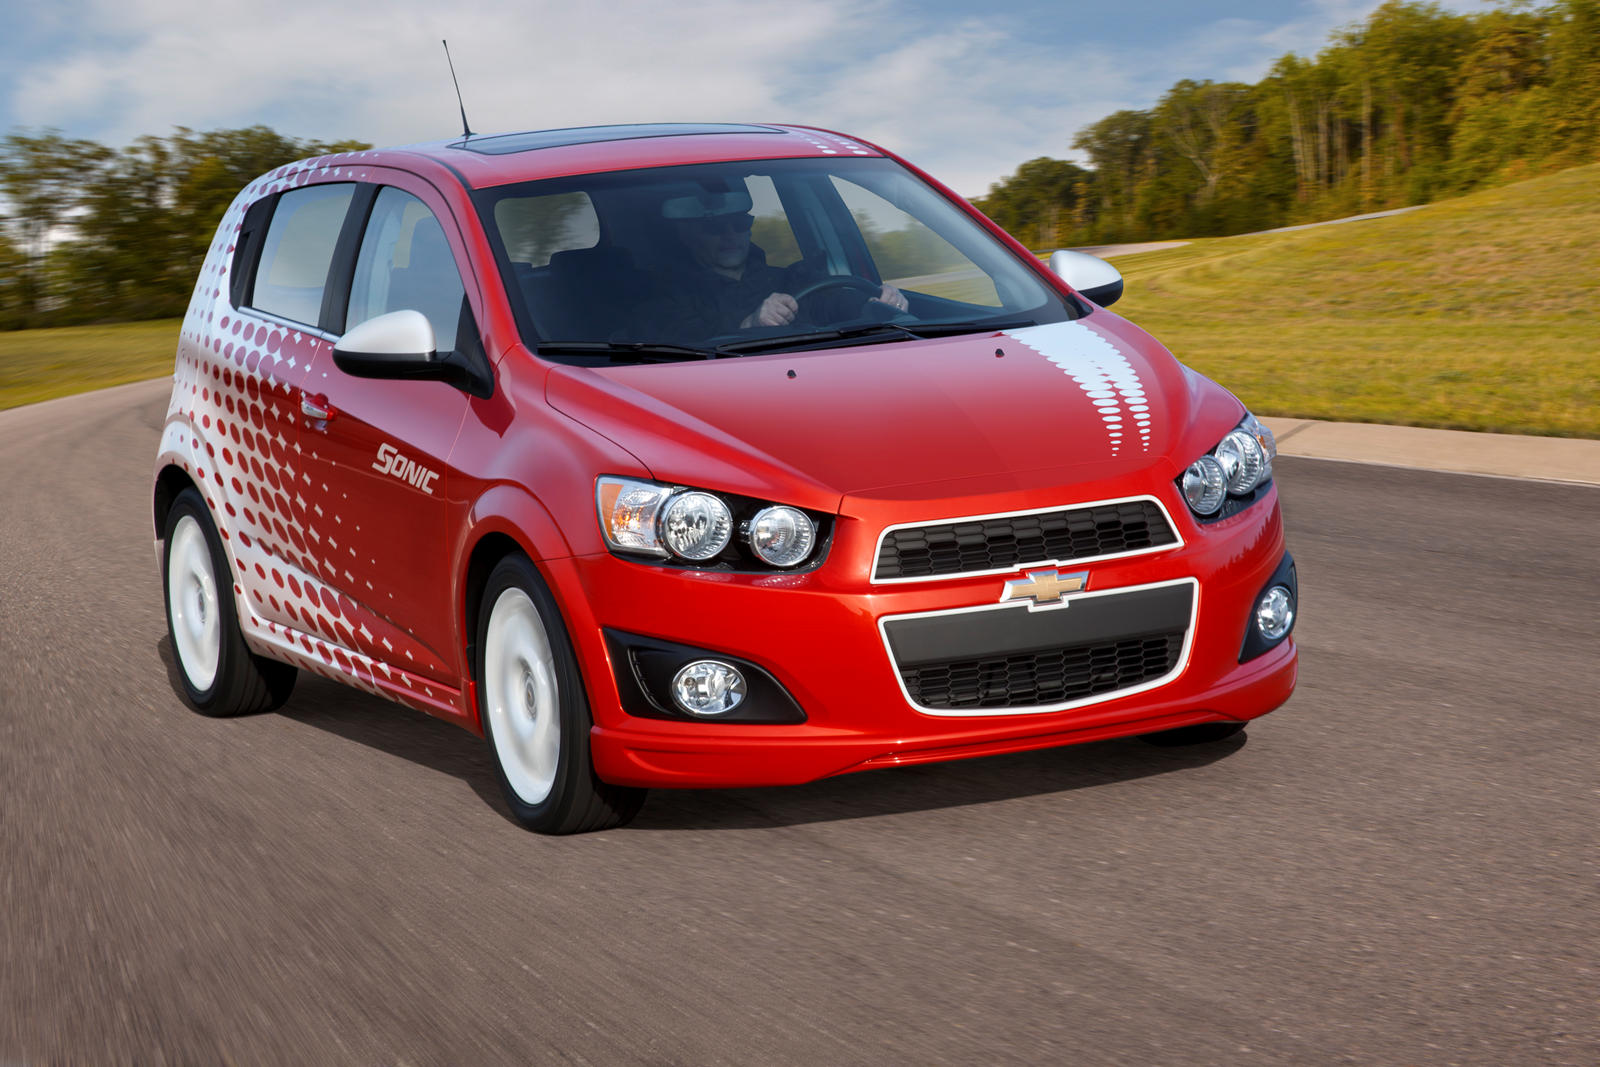 2013 Chevrolet Sonic Hatchback Review, Trims, Specs, Price, New